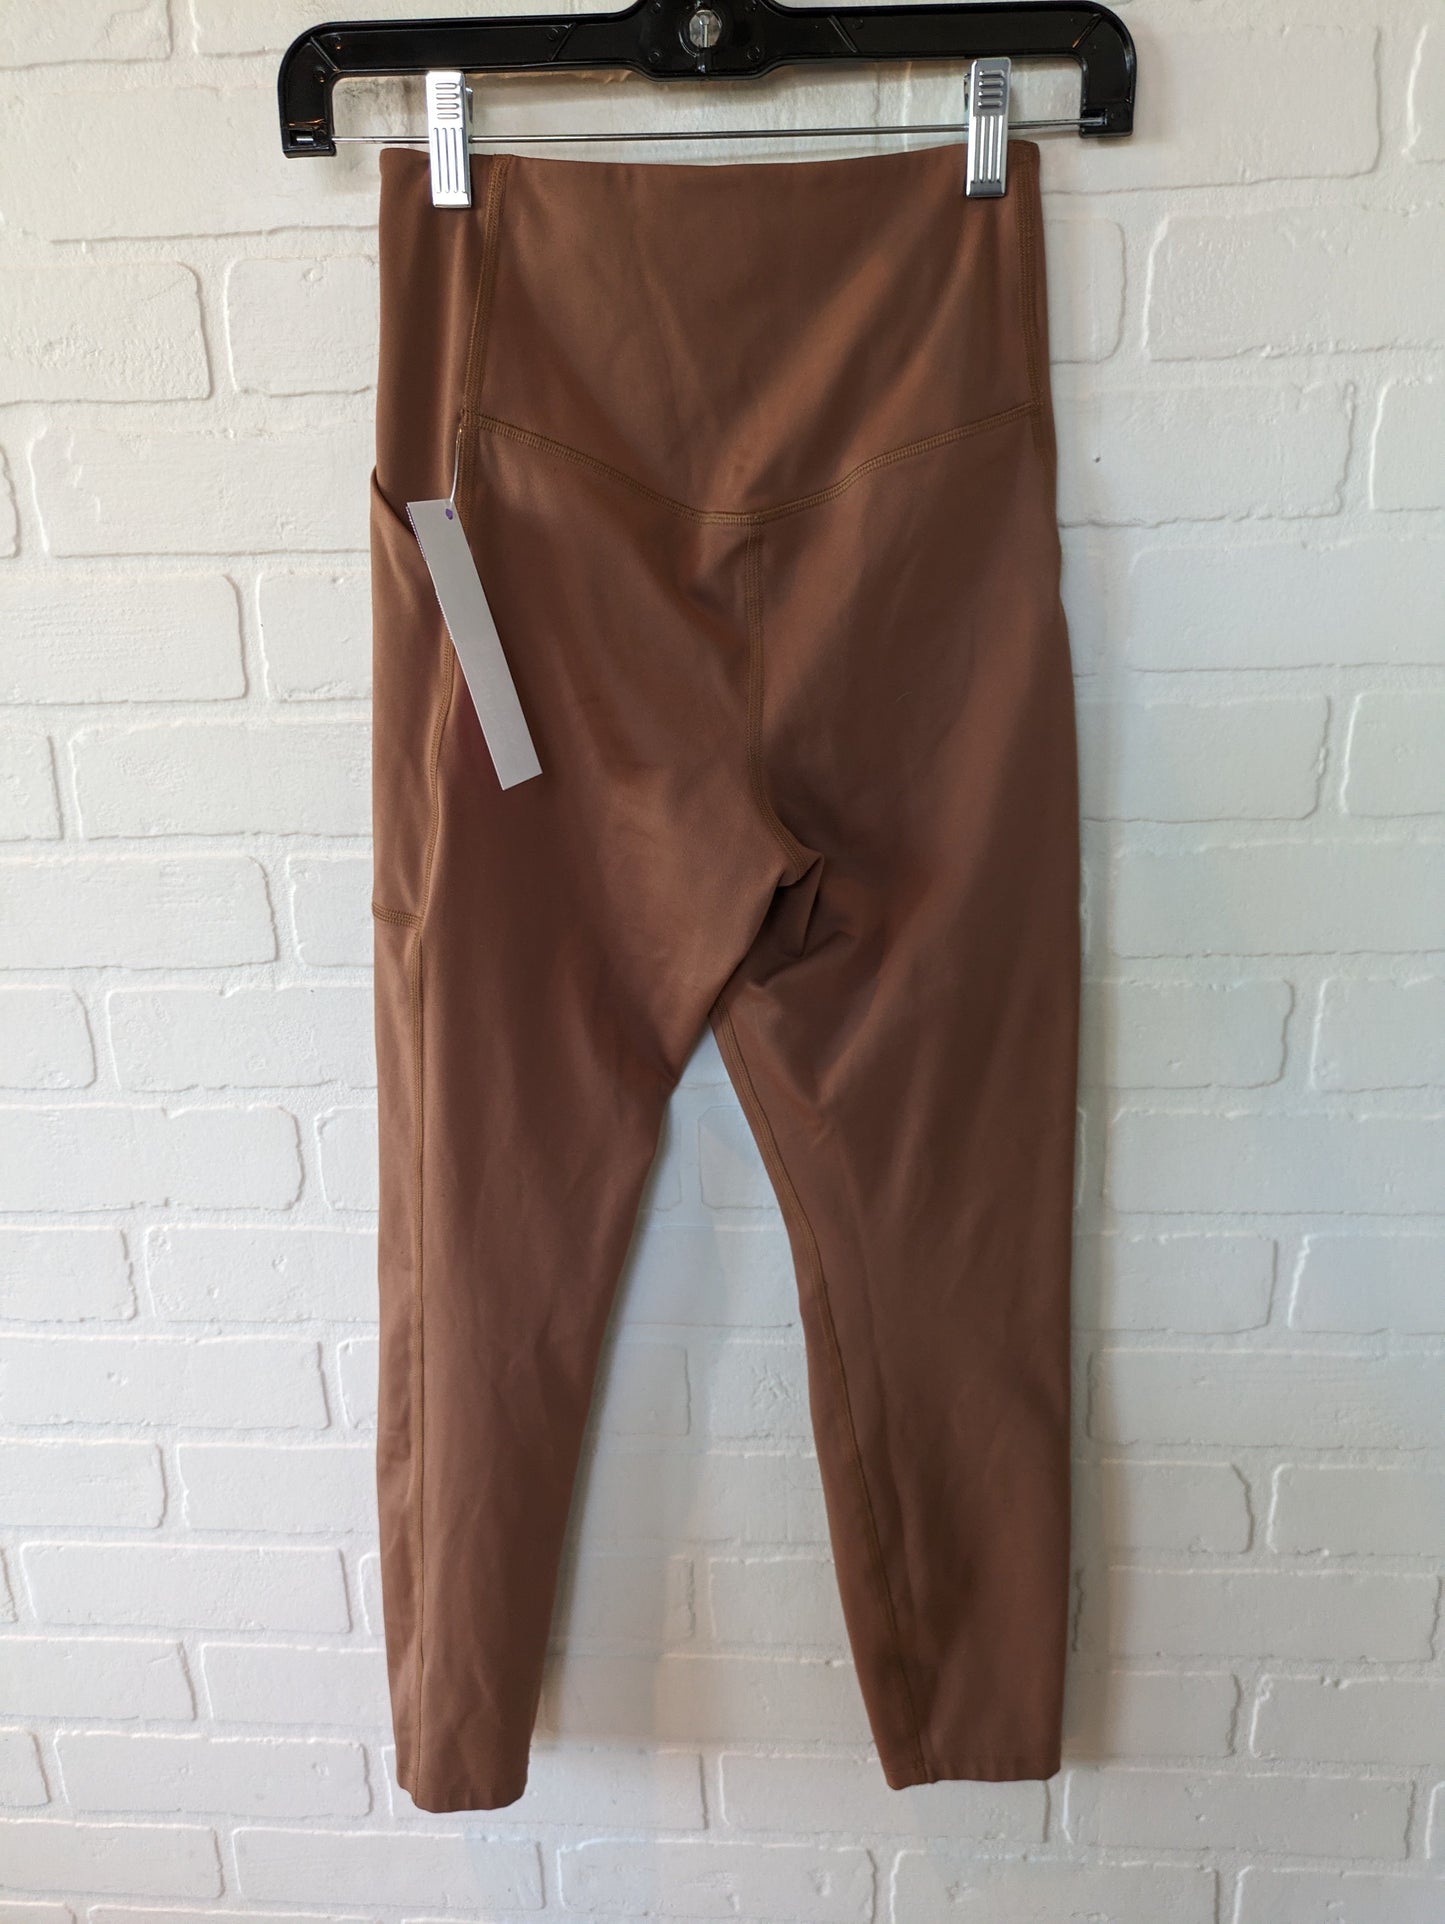 Brown Athletic Leggings Clothes Mentor, Size 4